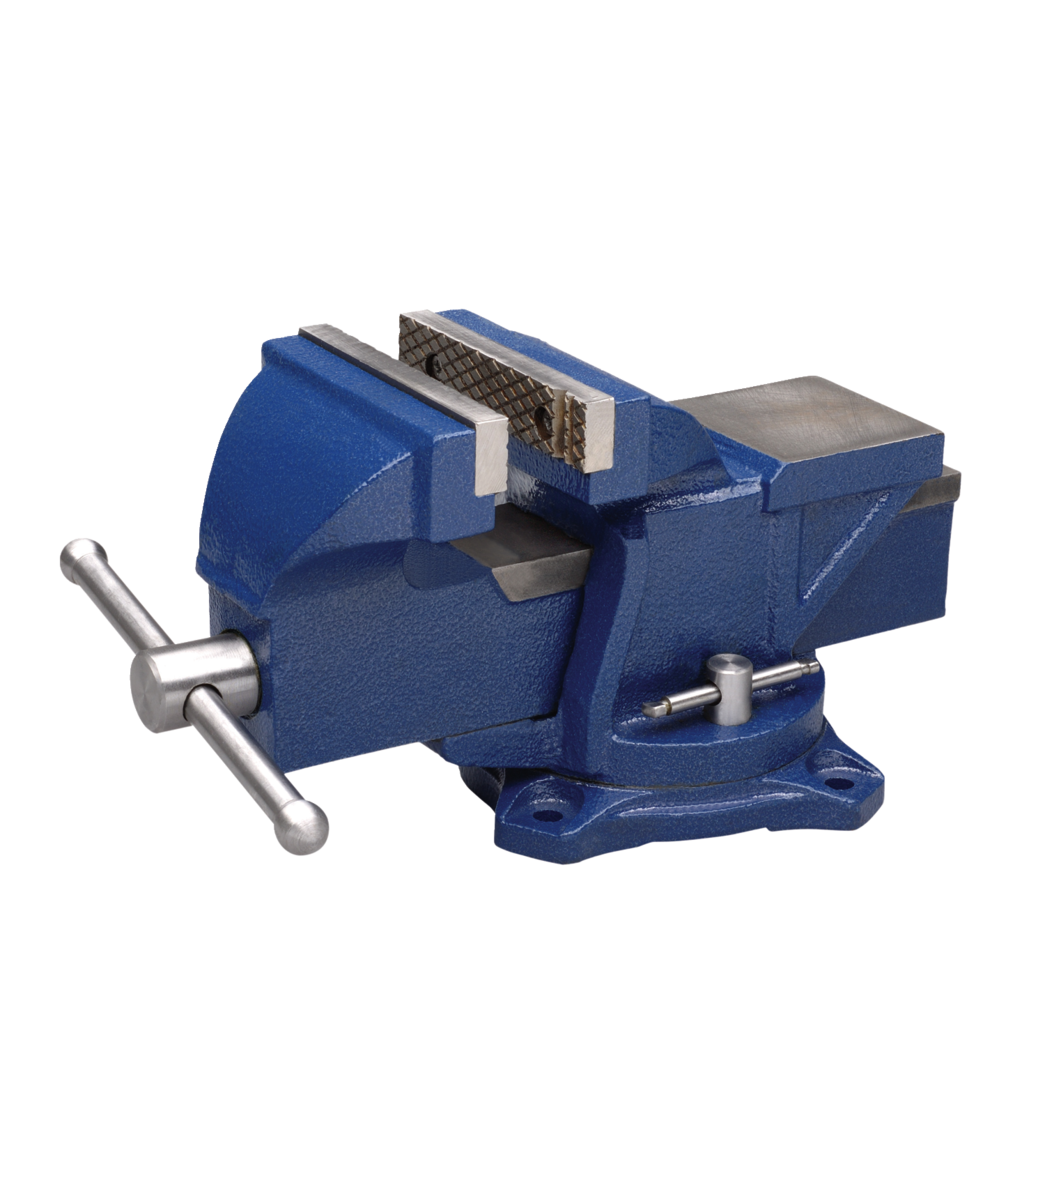 General Purpose 4” Jaw Bench Vise with Swivel Base